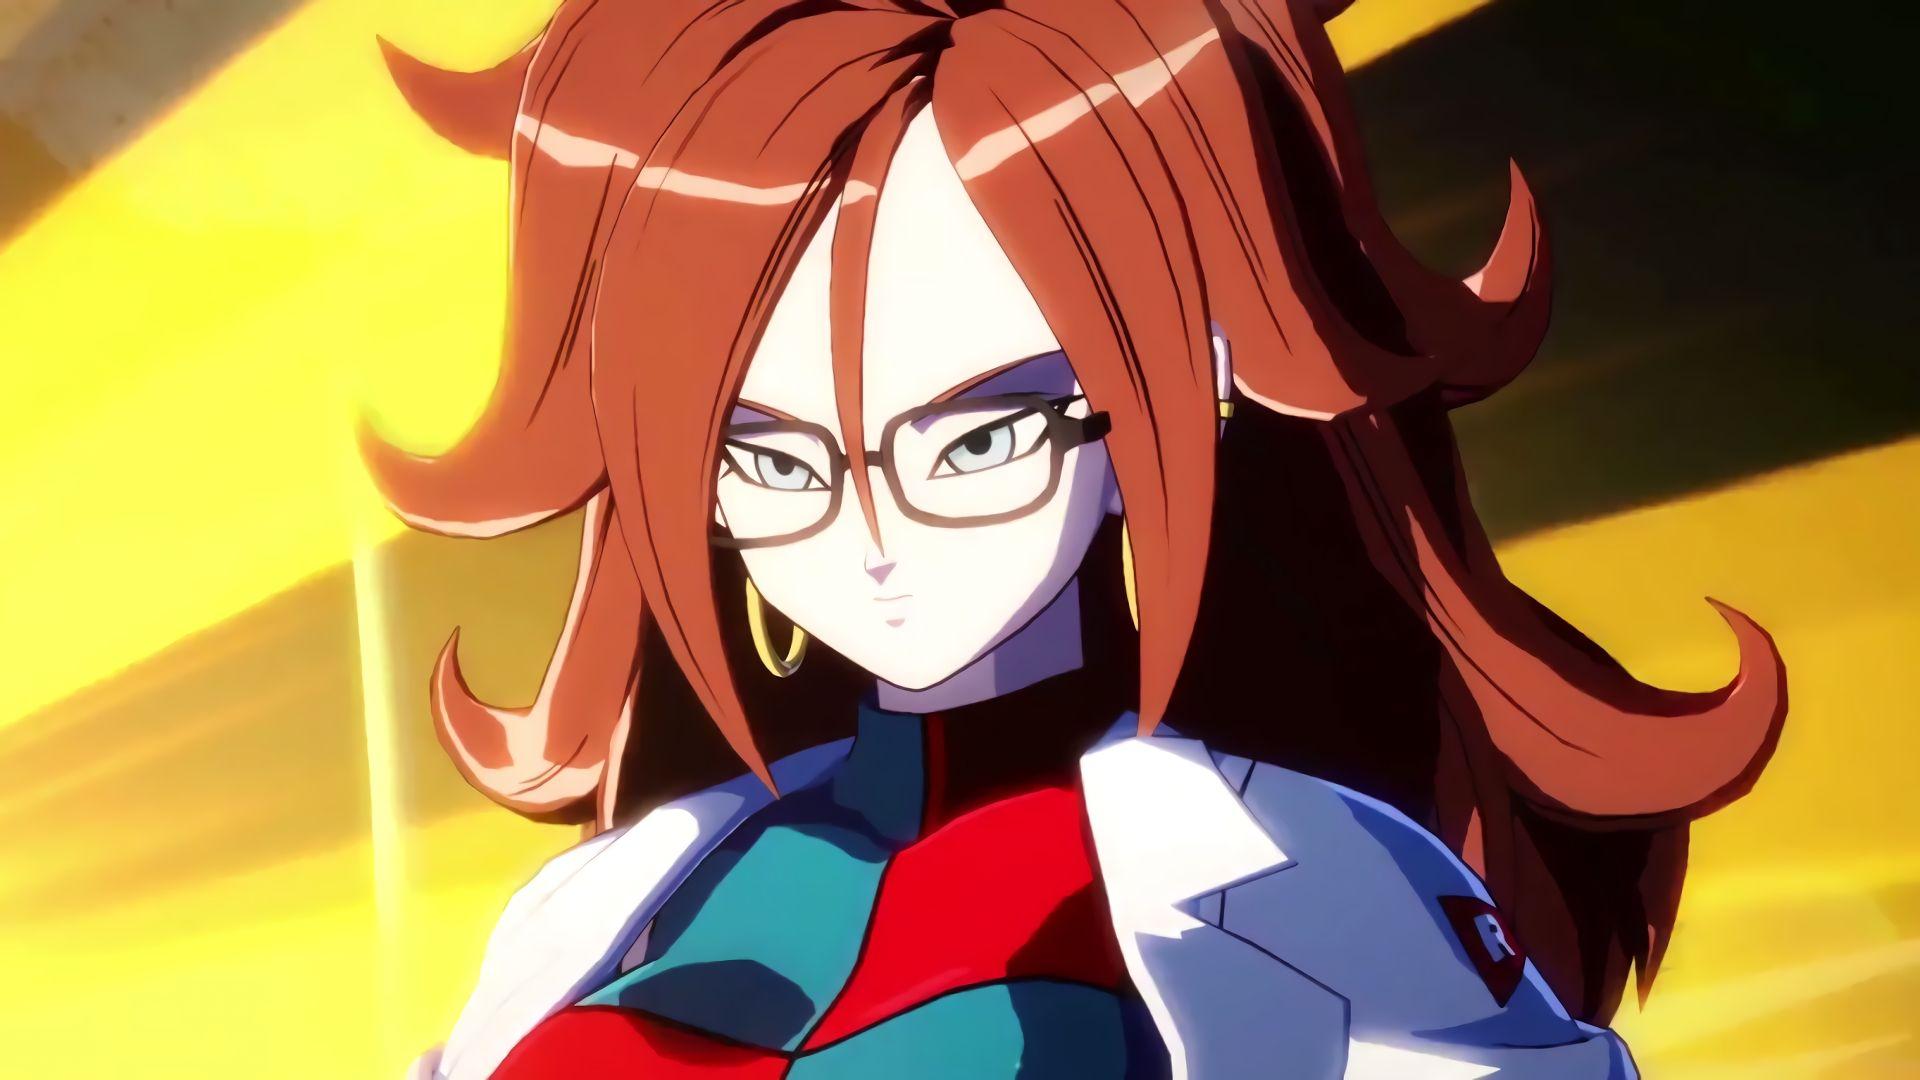 Android 21 [1920x1080]